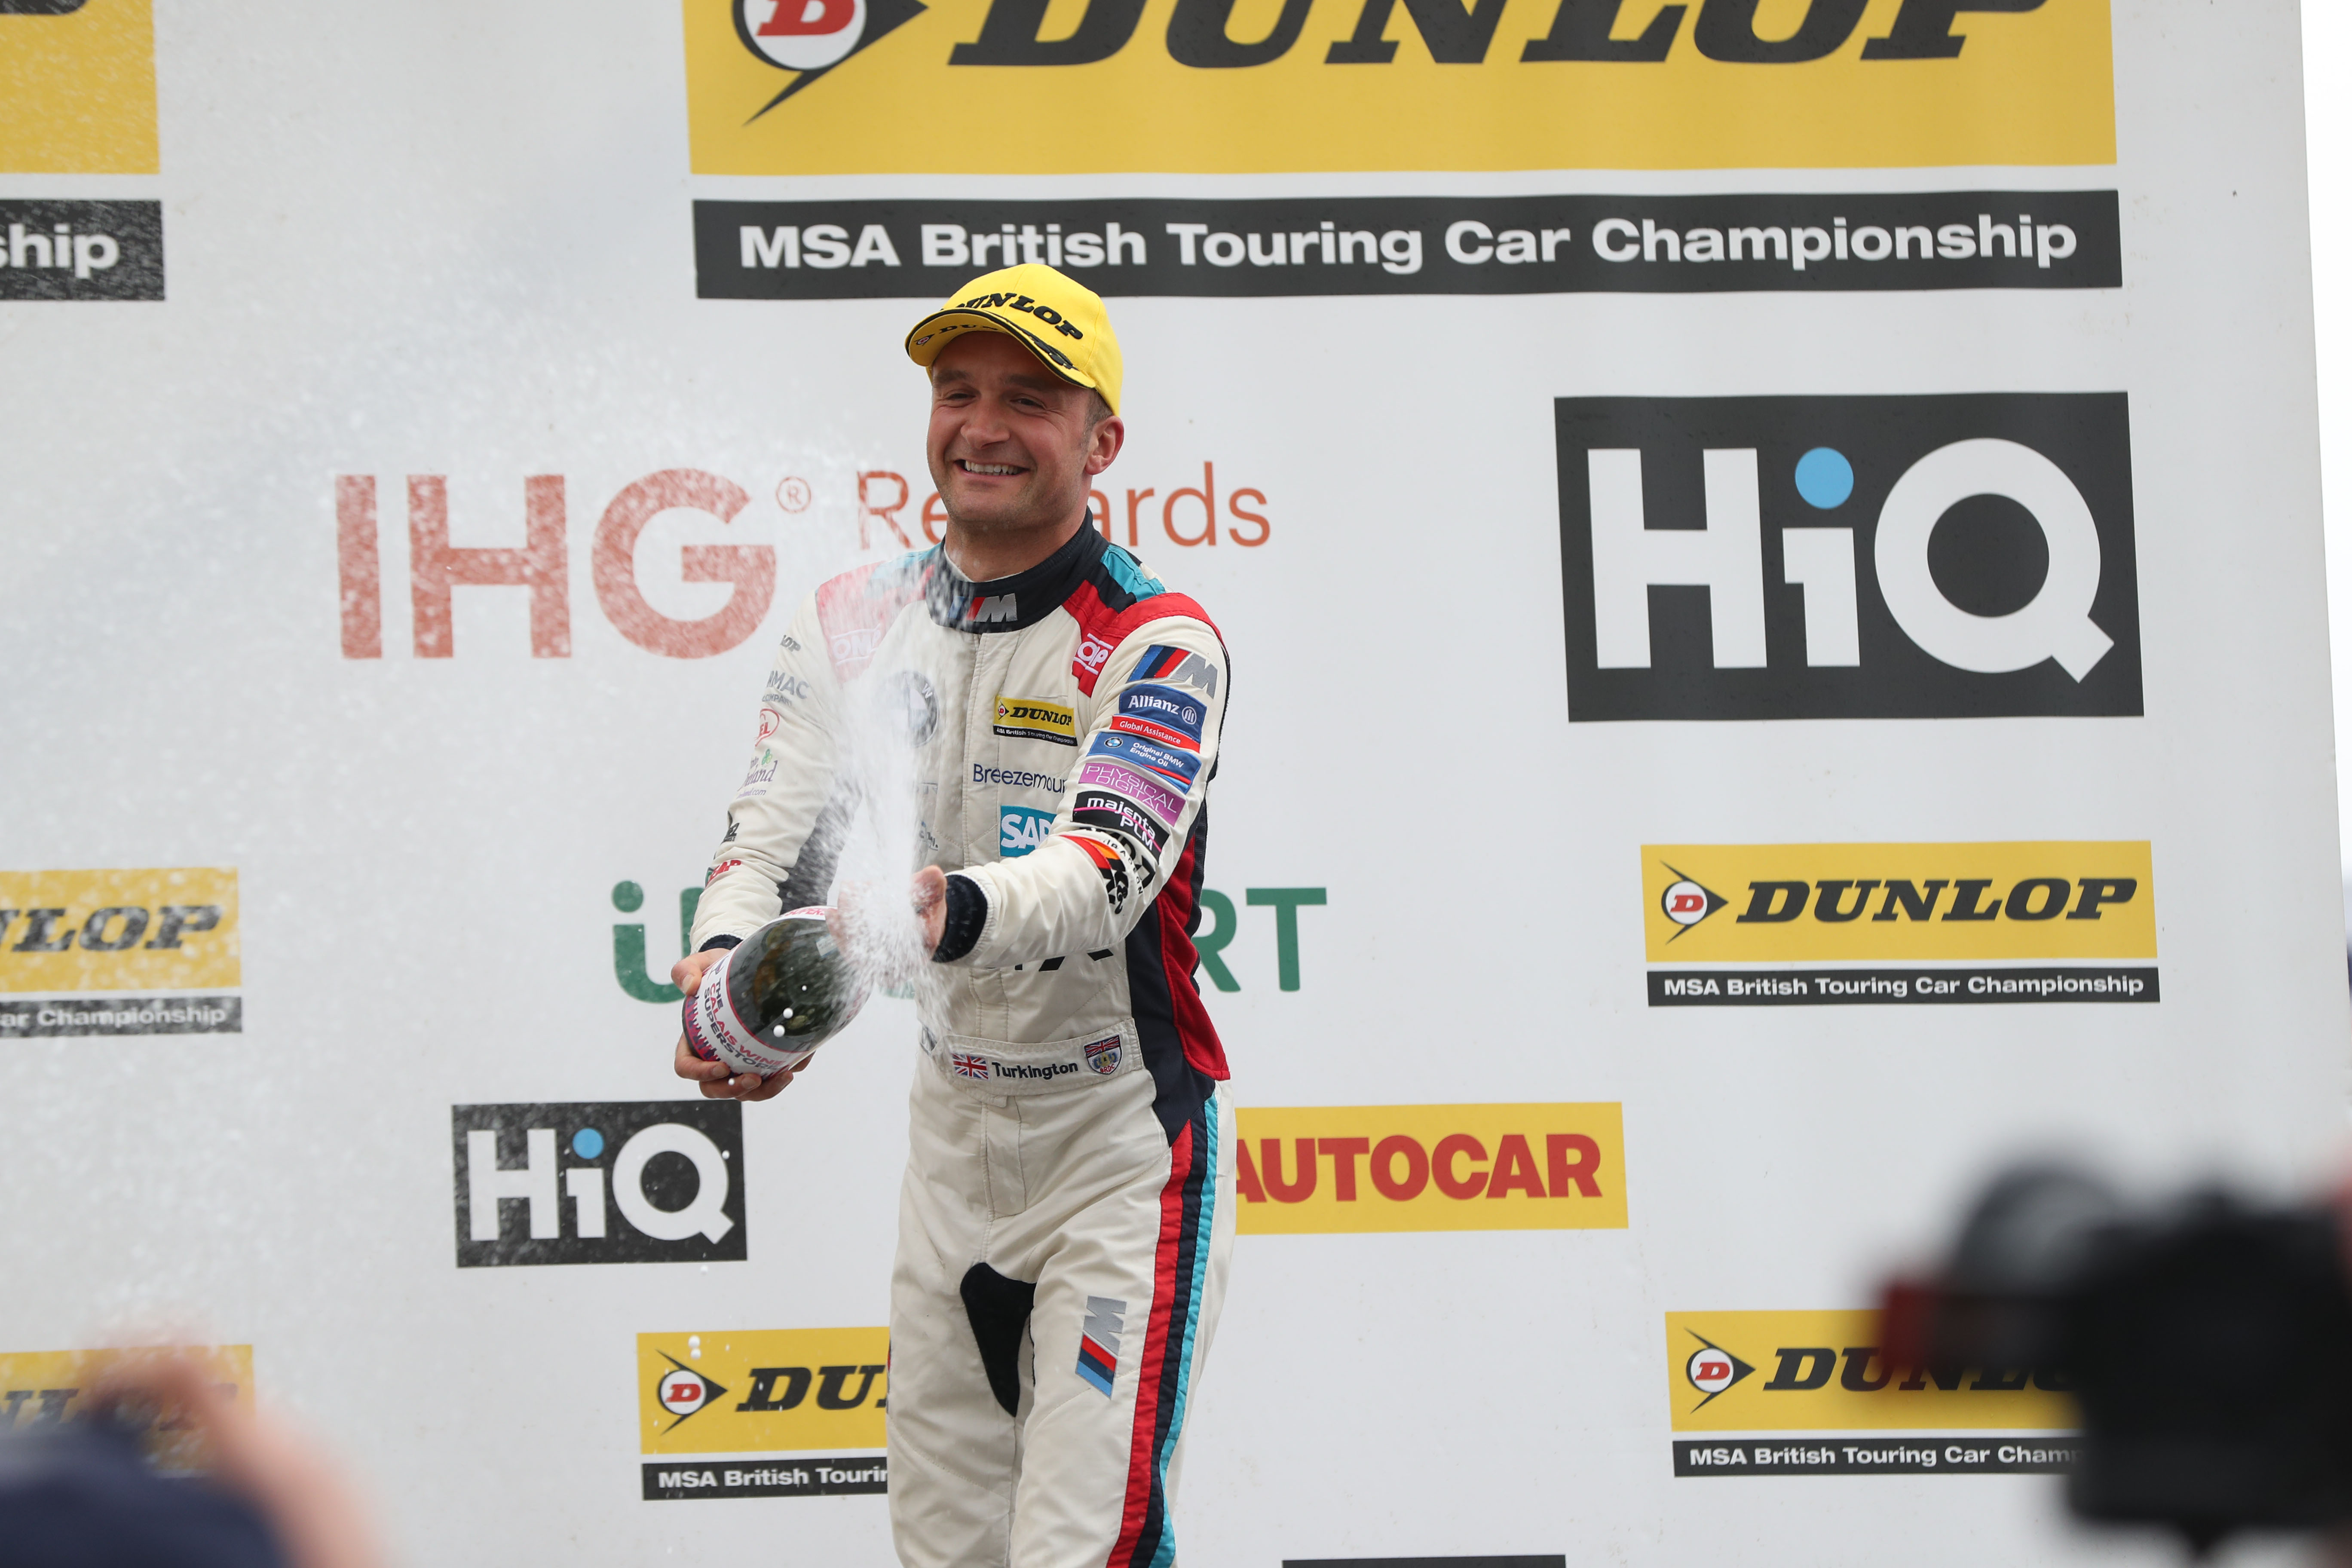 British Touring Car Championship season that has seen more race winners than ever before, there’s at least one consistent factor that links all of the champions in every category – they all use Cobra seats.